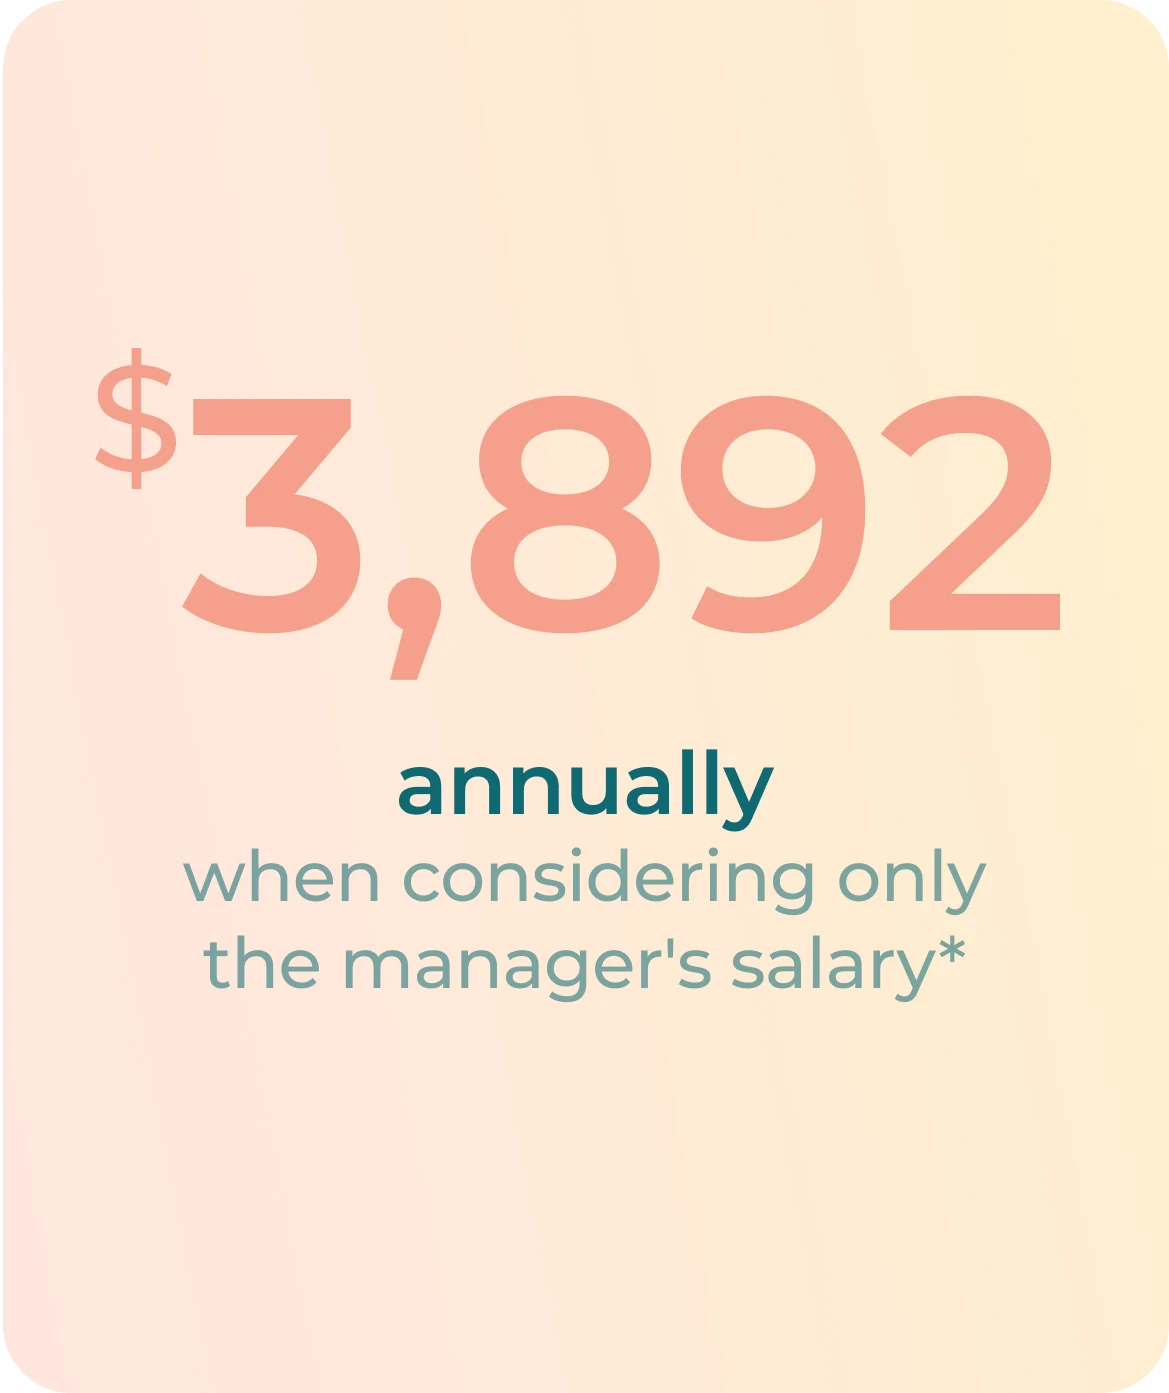 $3,892 annually when considering only the manager's salary